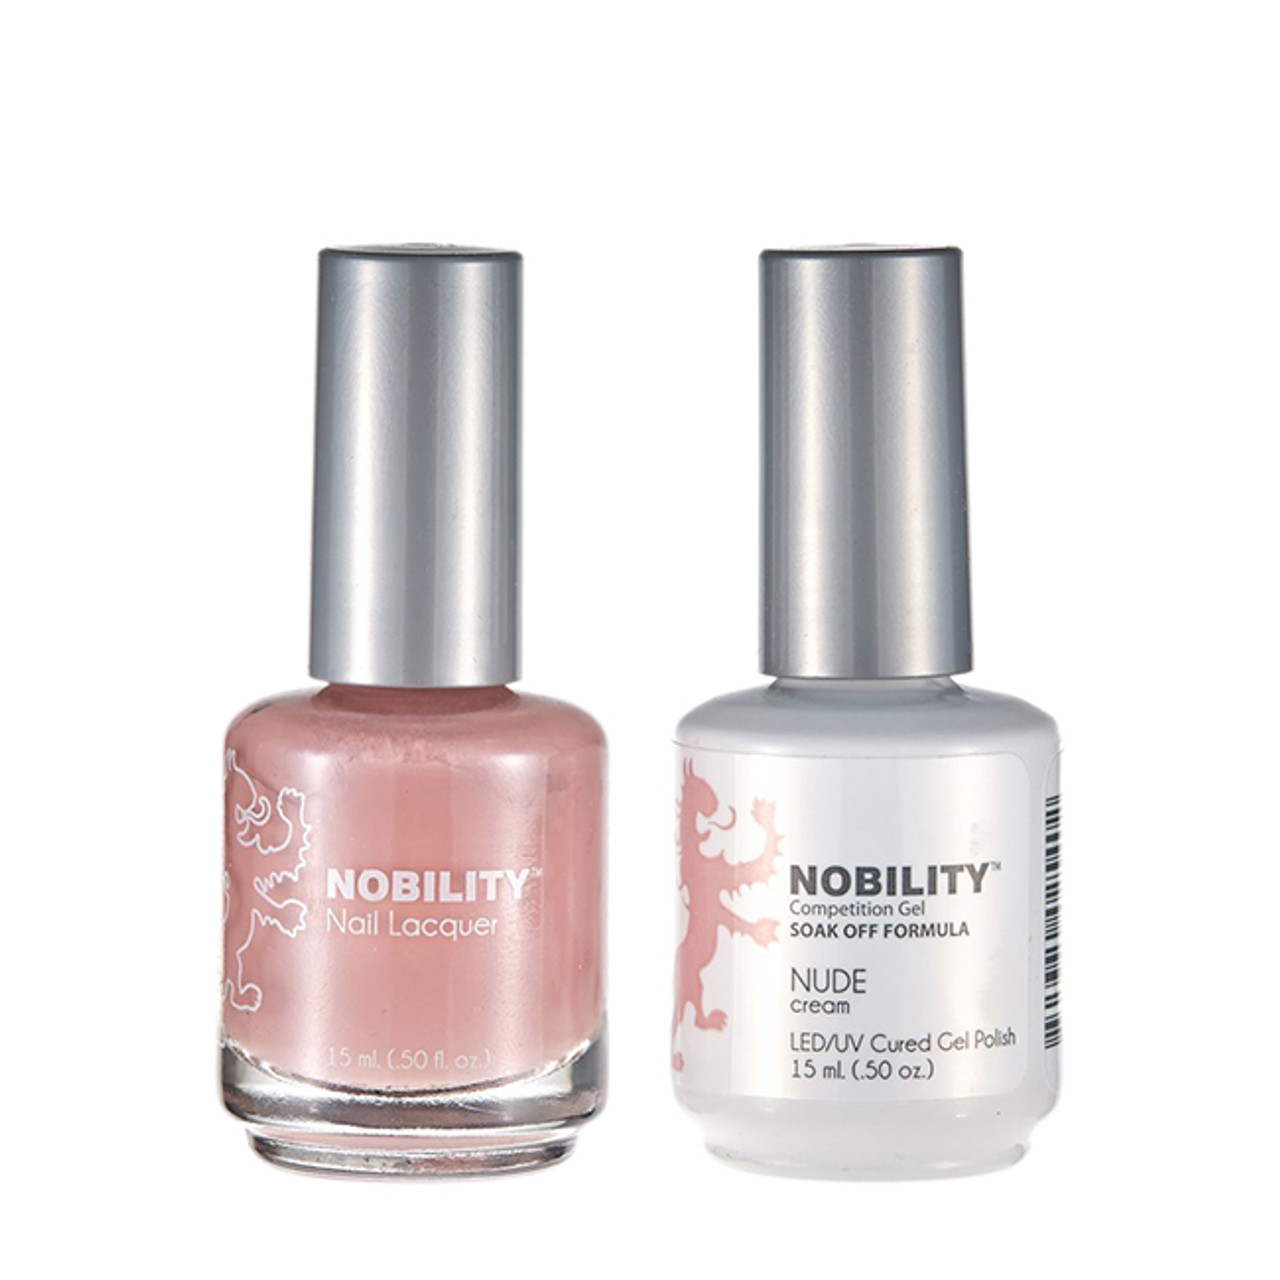 LeChat Nobility Gel Polish & Nail Lacquer Duo Set Nude - .5 oz / 15 ml